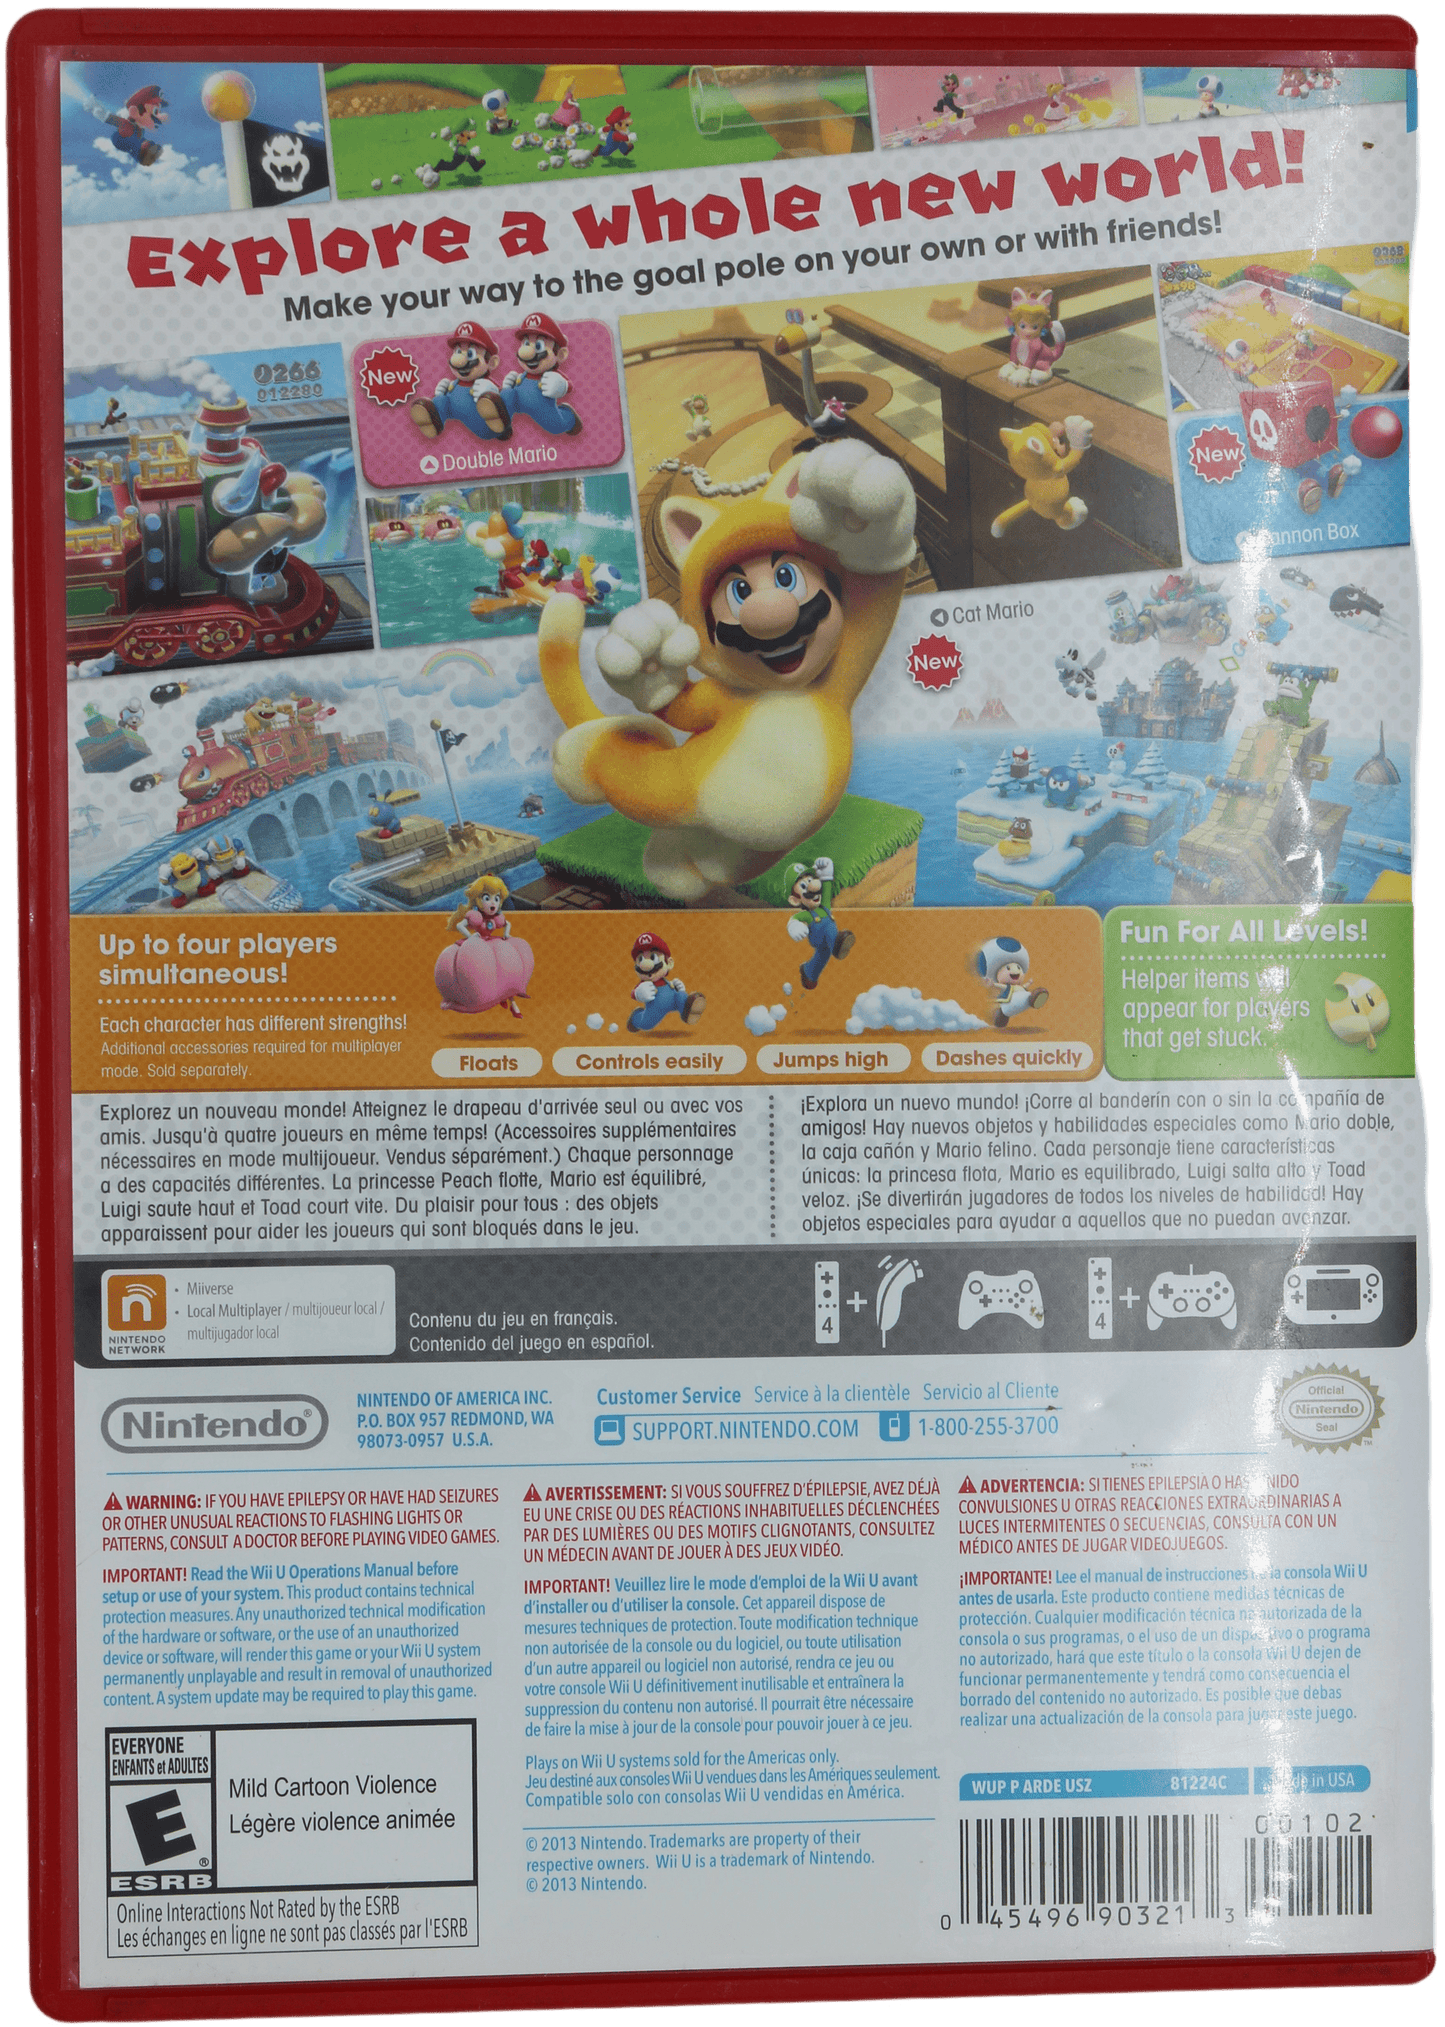 Super Mario 3D World [Family Game Of The Year]